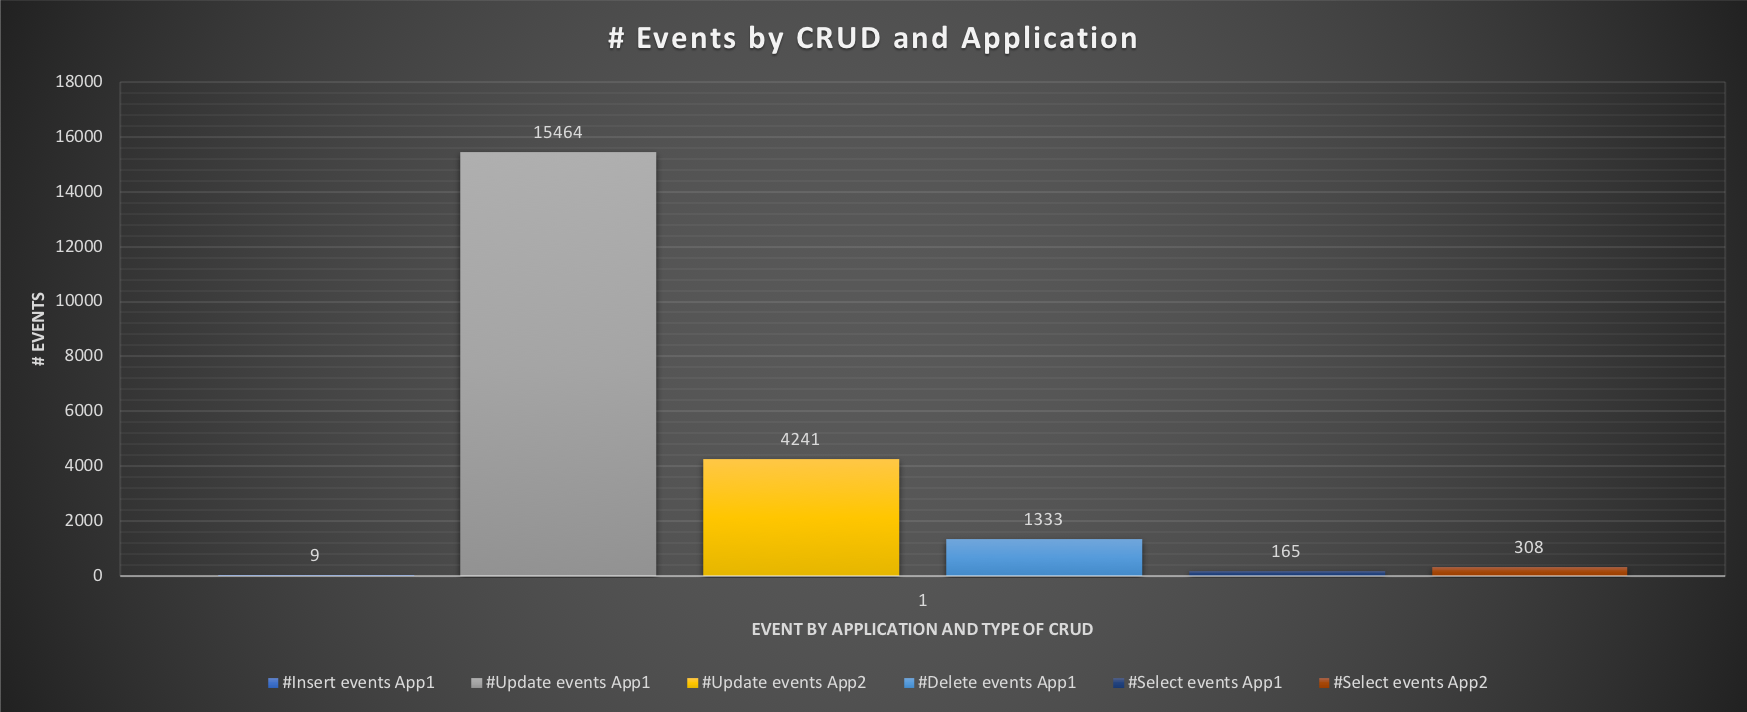 events_by_crud1